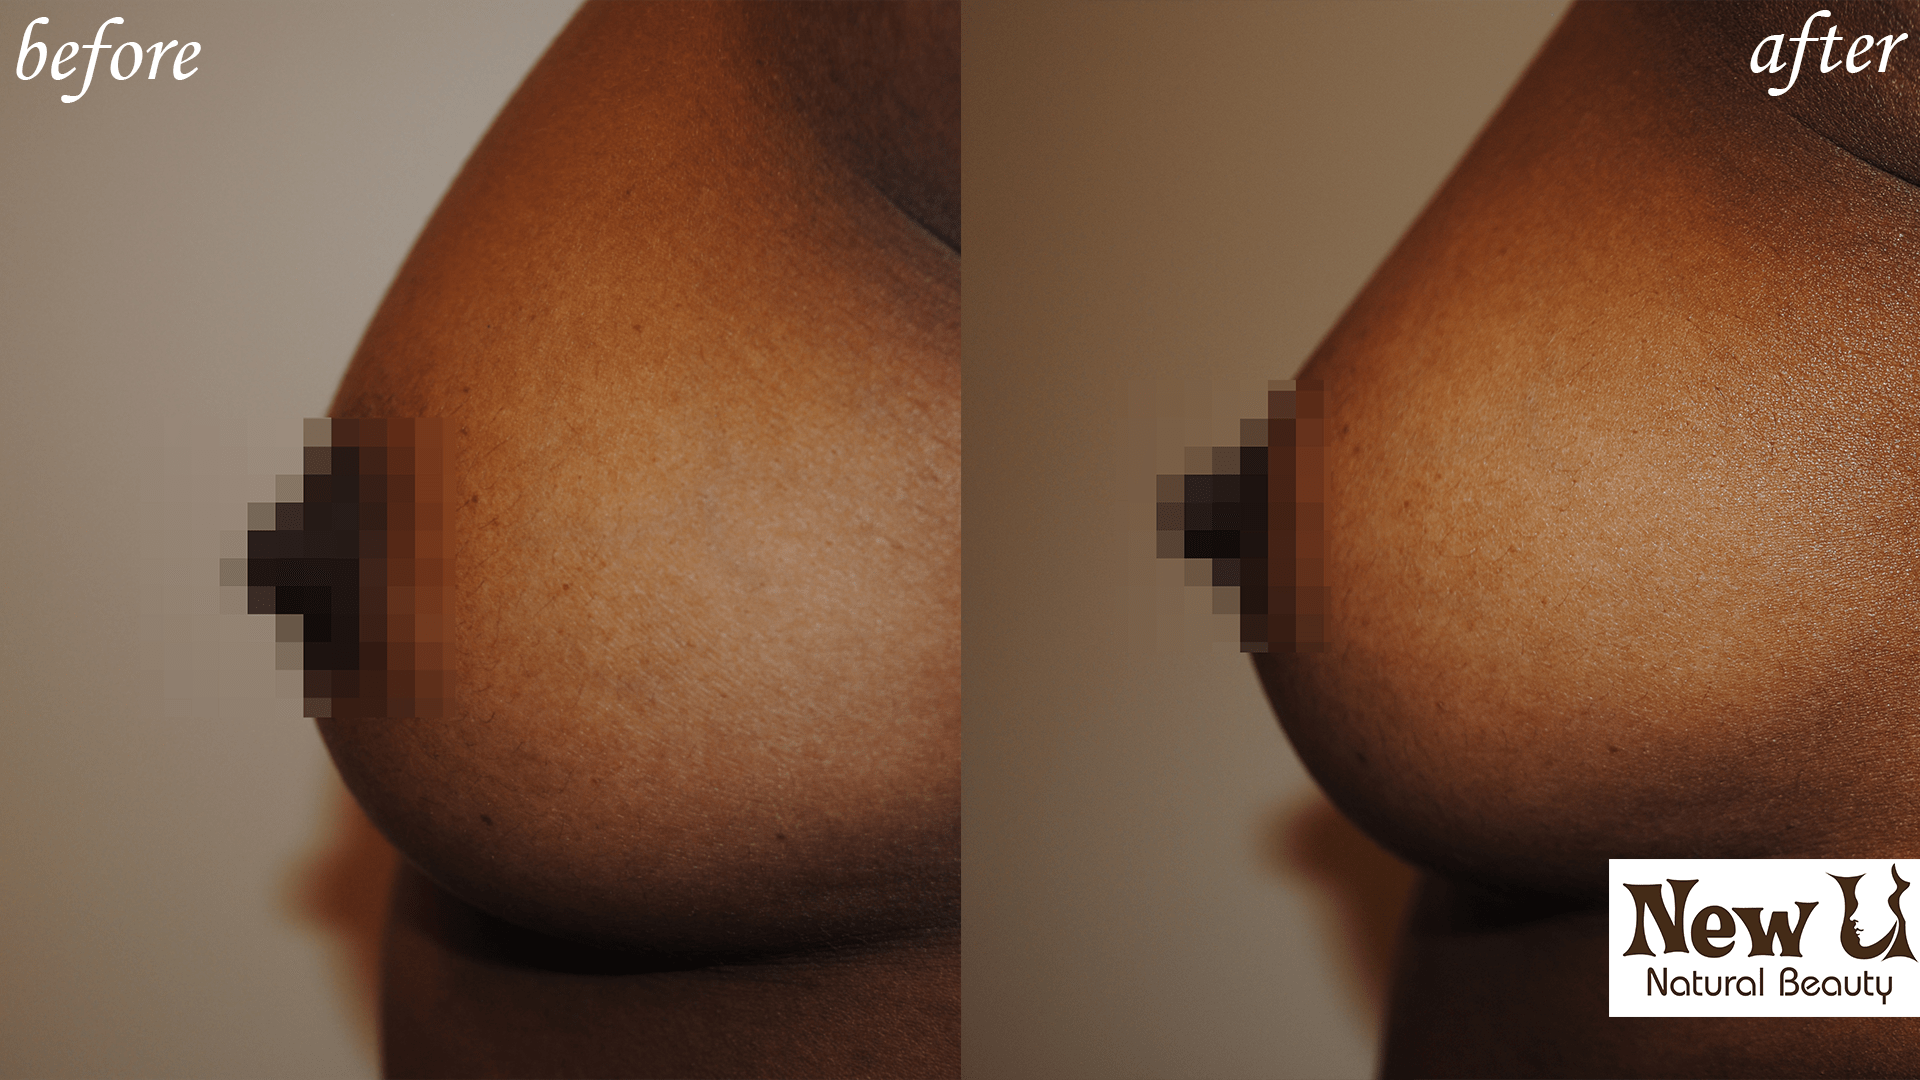 Breast Enhancement 1 Las Vegas Before and After